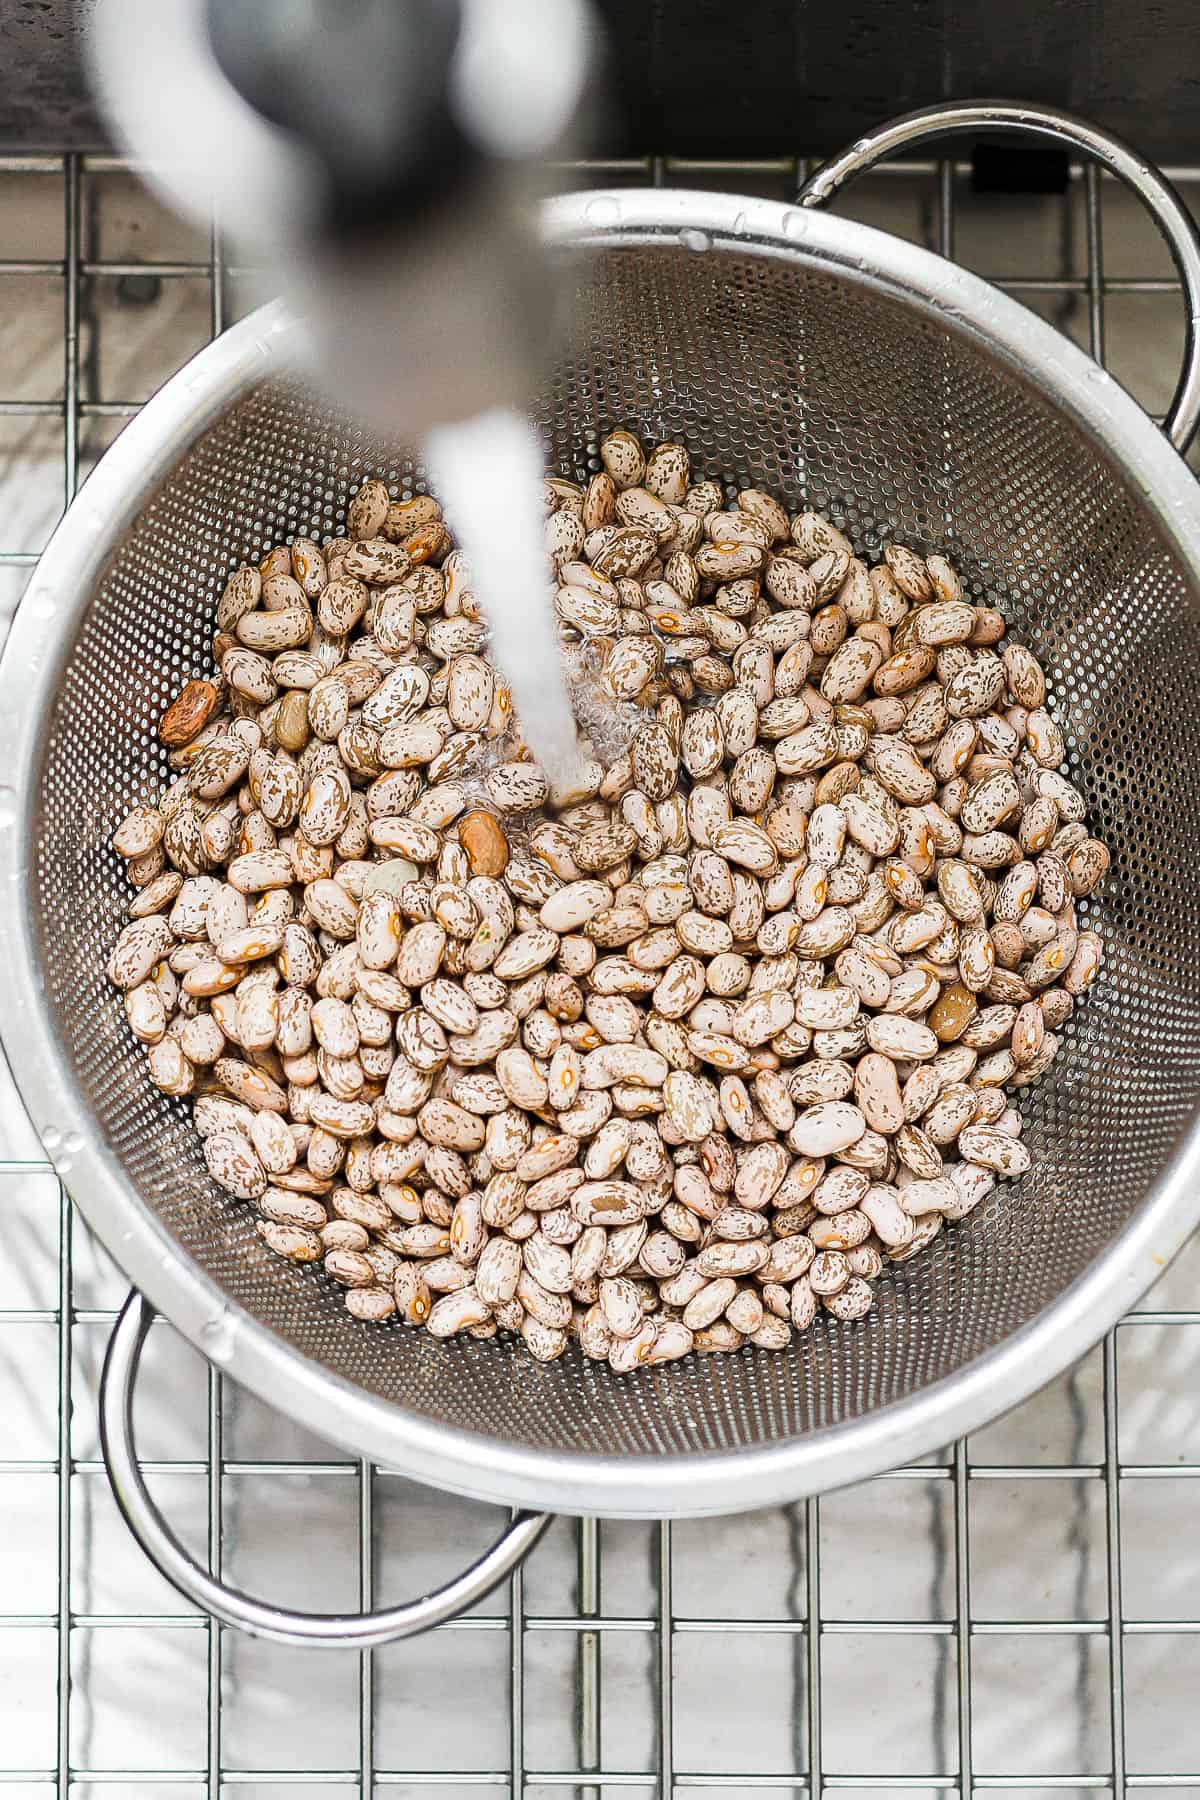 Pinto beans being rinsed in a strainer.